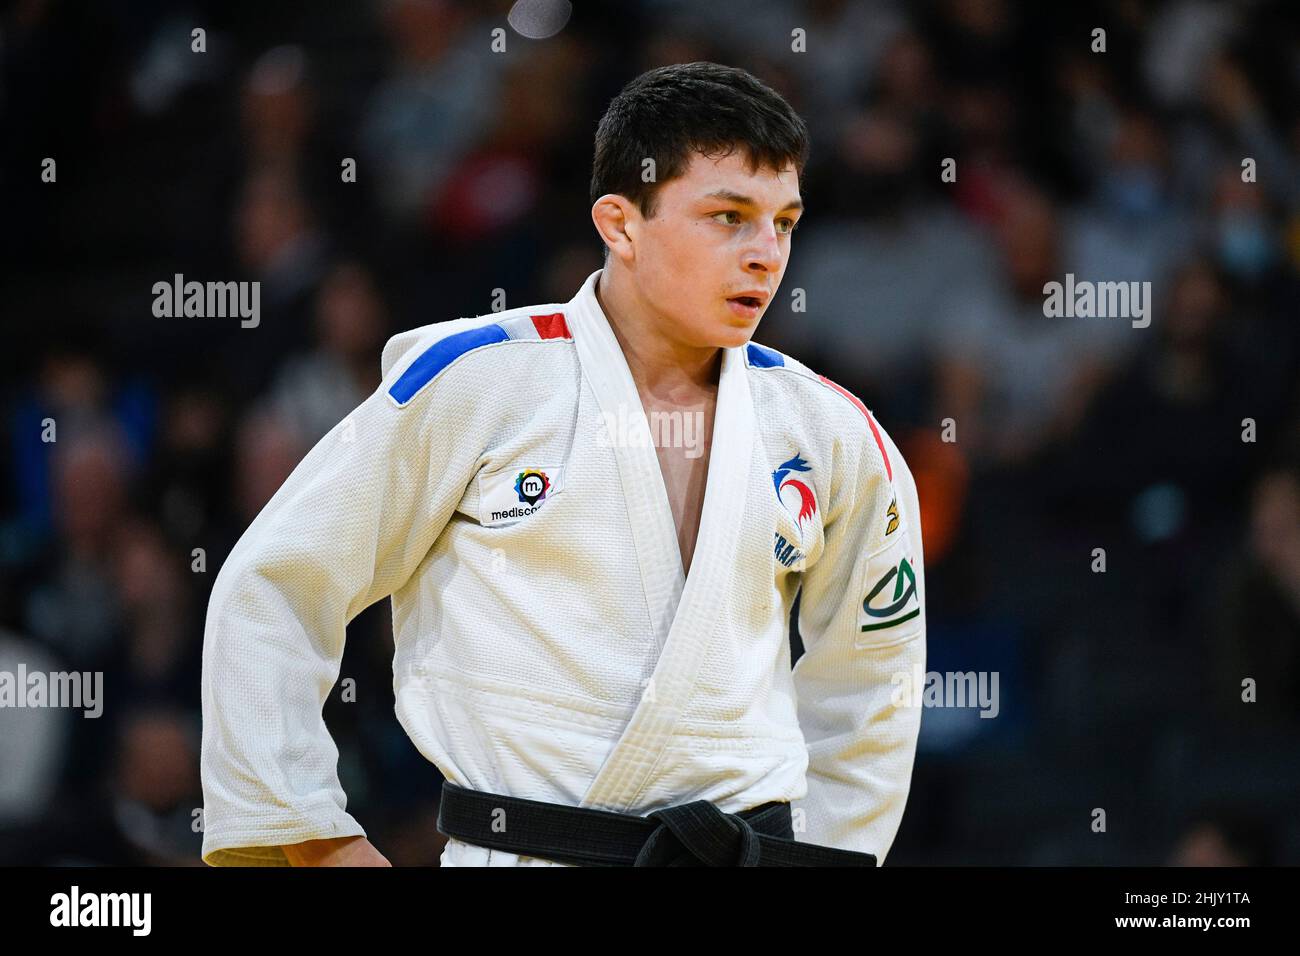 Men -60 kg, Romain VALADIER PICARD of France Bronze medal during the Paris Grand Slam 2021, Judo event on October 16, 2021 at AccorHotels Arena in Par Stock Photo